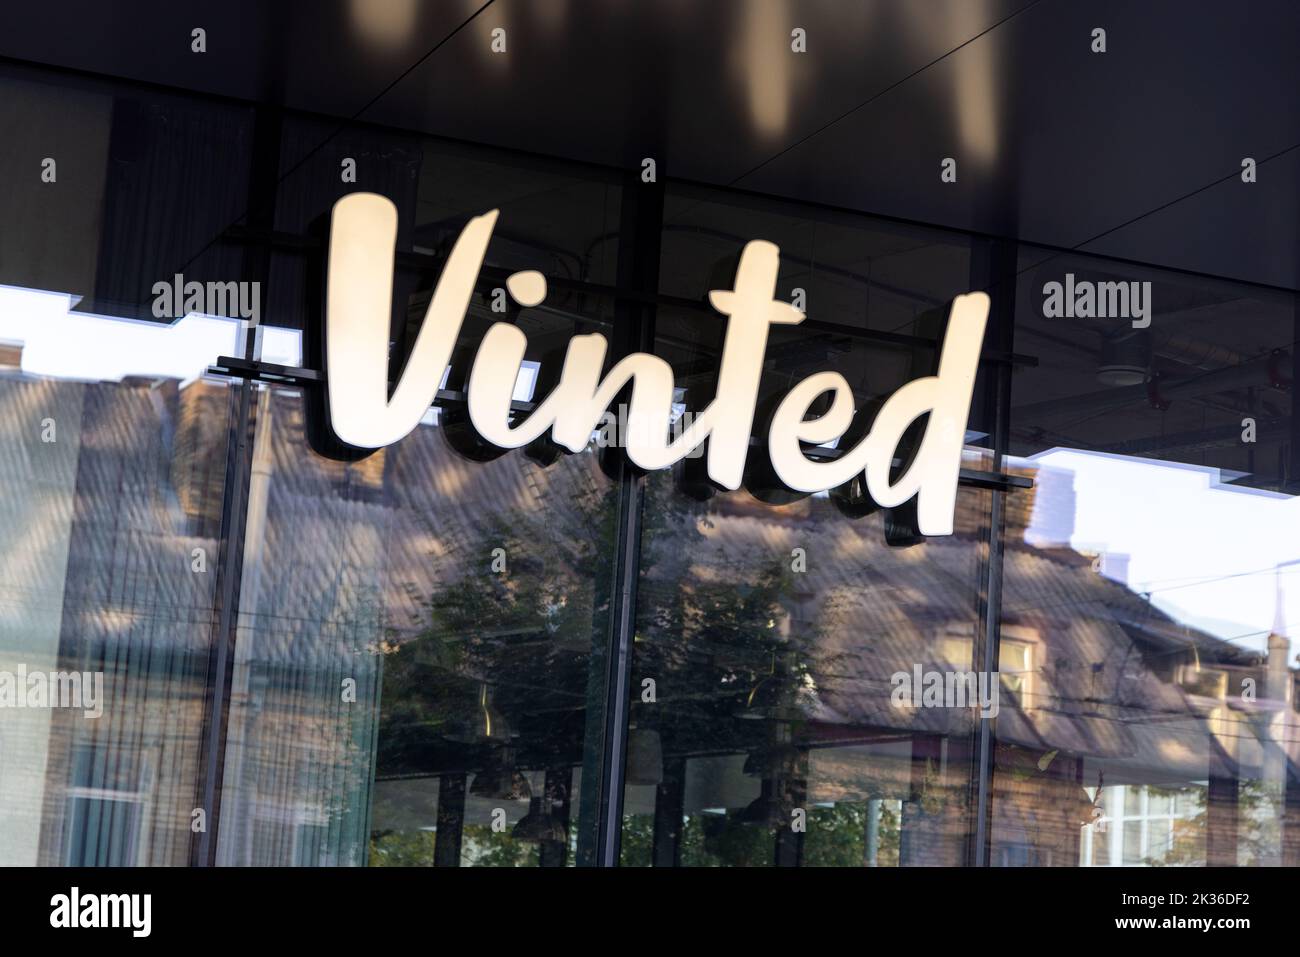 Vinted logo sign on main office, headquarters building wall. Vinted is online marketplace for second hand clothing, Unicorn startup Stock Photo